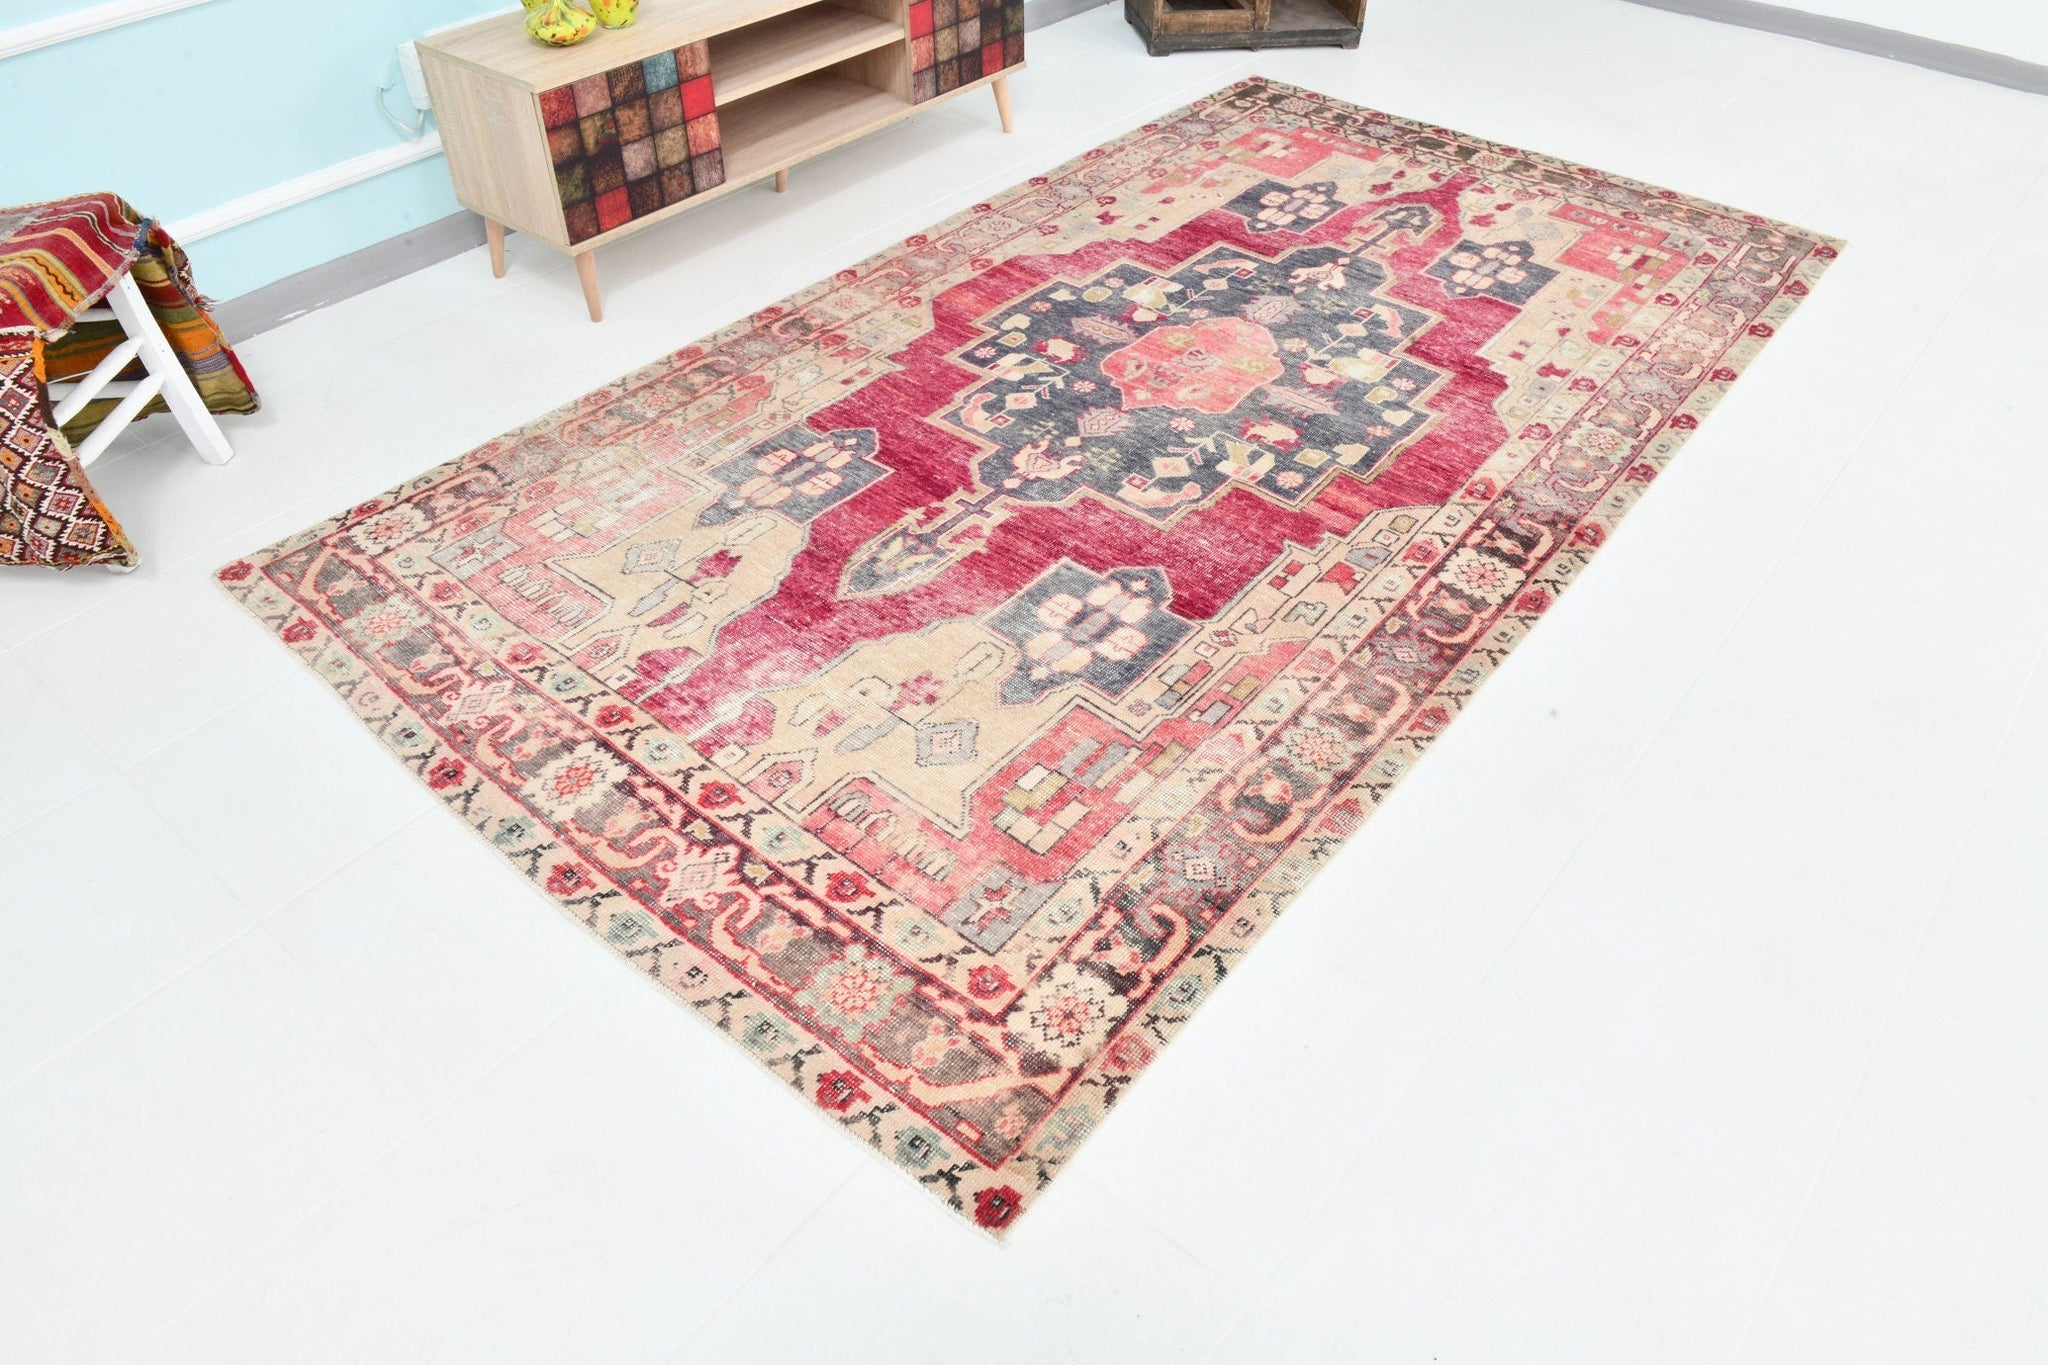 Rectangular red rug with beige and brown floral pattern. 5’ x 10’ Turkish Vintage Rug -